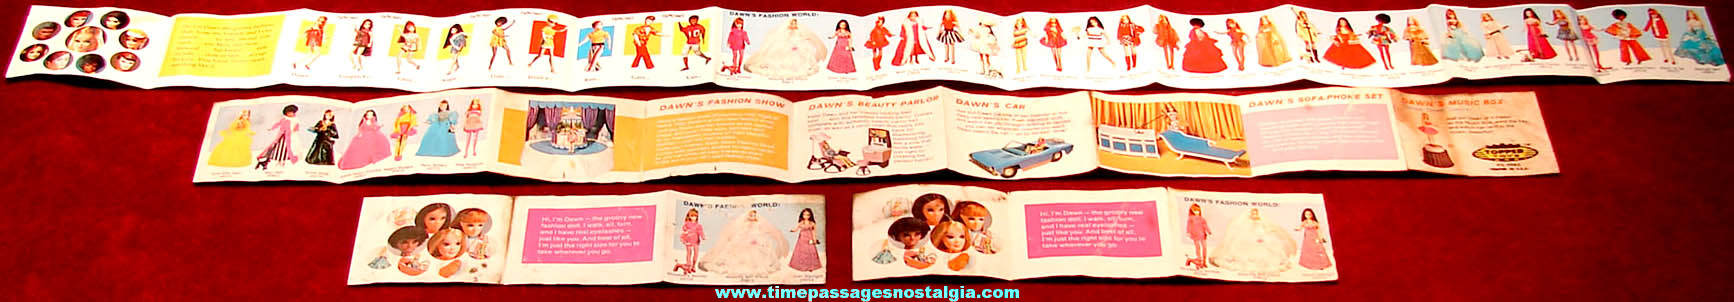 (2) Different 1970s Dawn Character Doll and Toy Accessories Advertising Brochures & A Partial Section